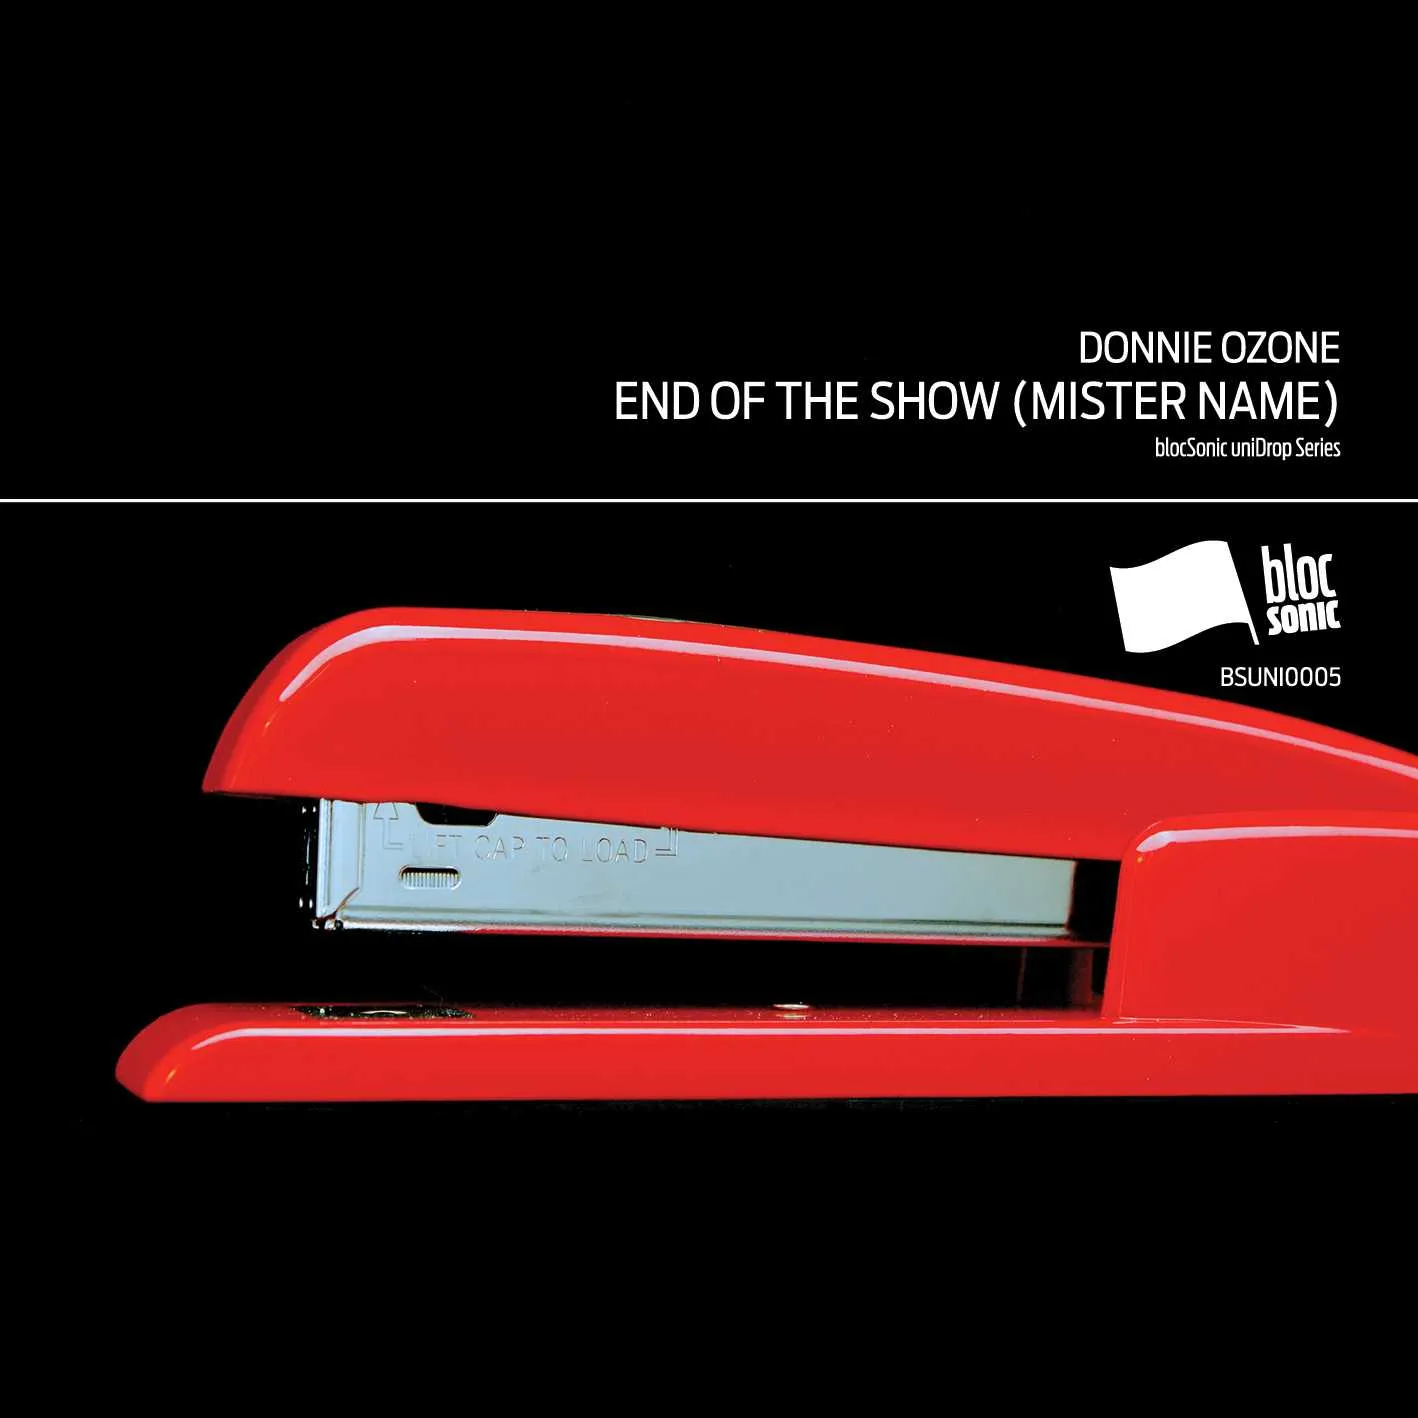 Album cover for “End of the Show (Mister Name)” by Donnie Ozone